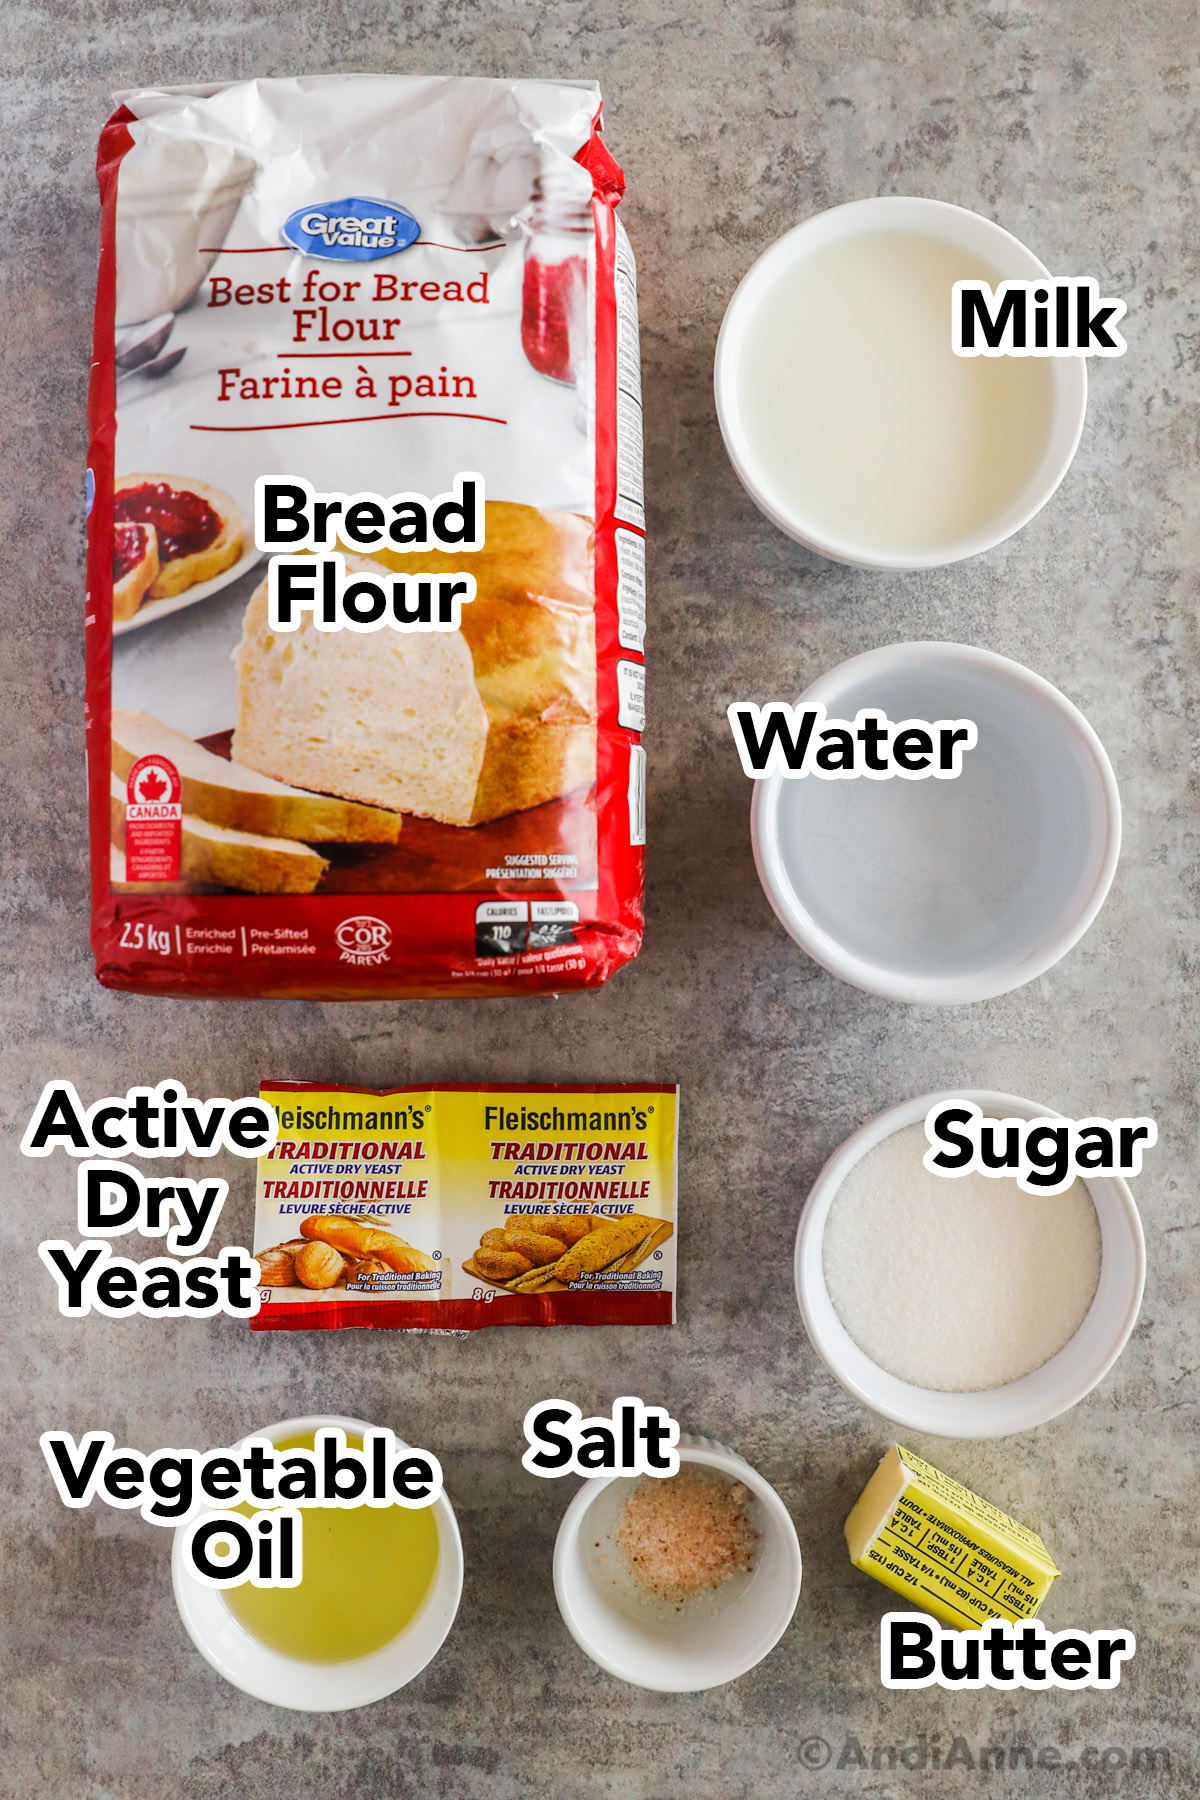 Bag of bread flour, bowls of milk, water, sugar, vegetable oil, salt, butter and packets of dry yeast.